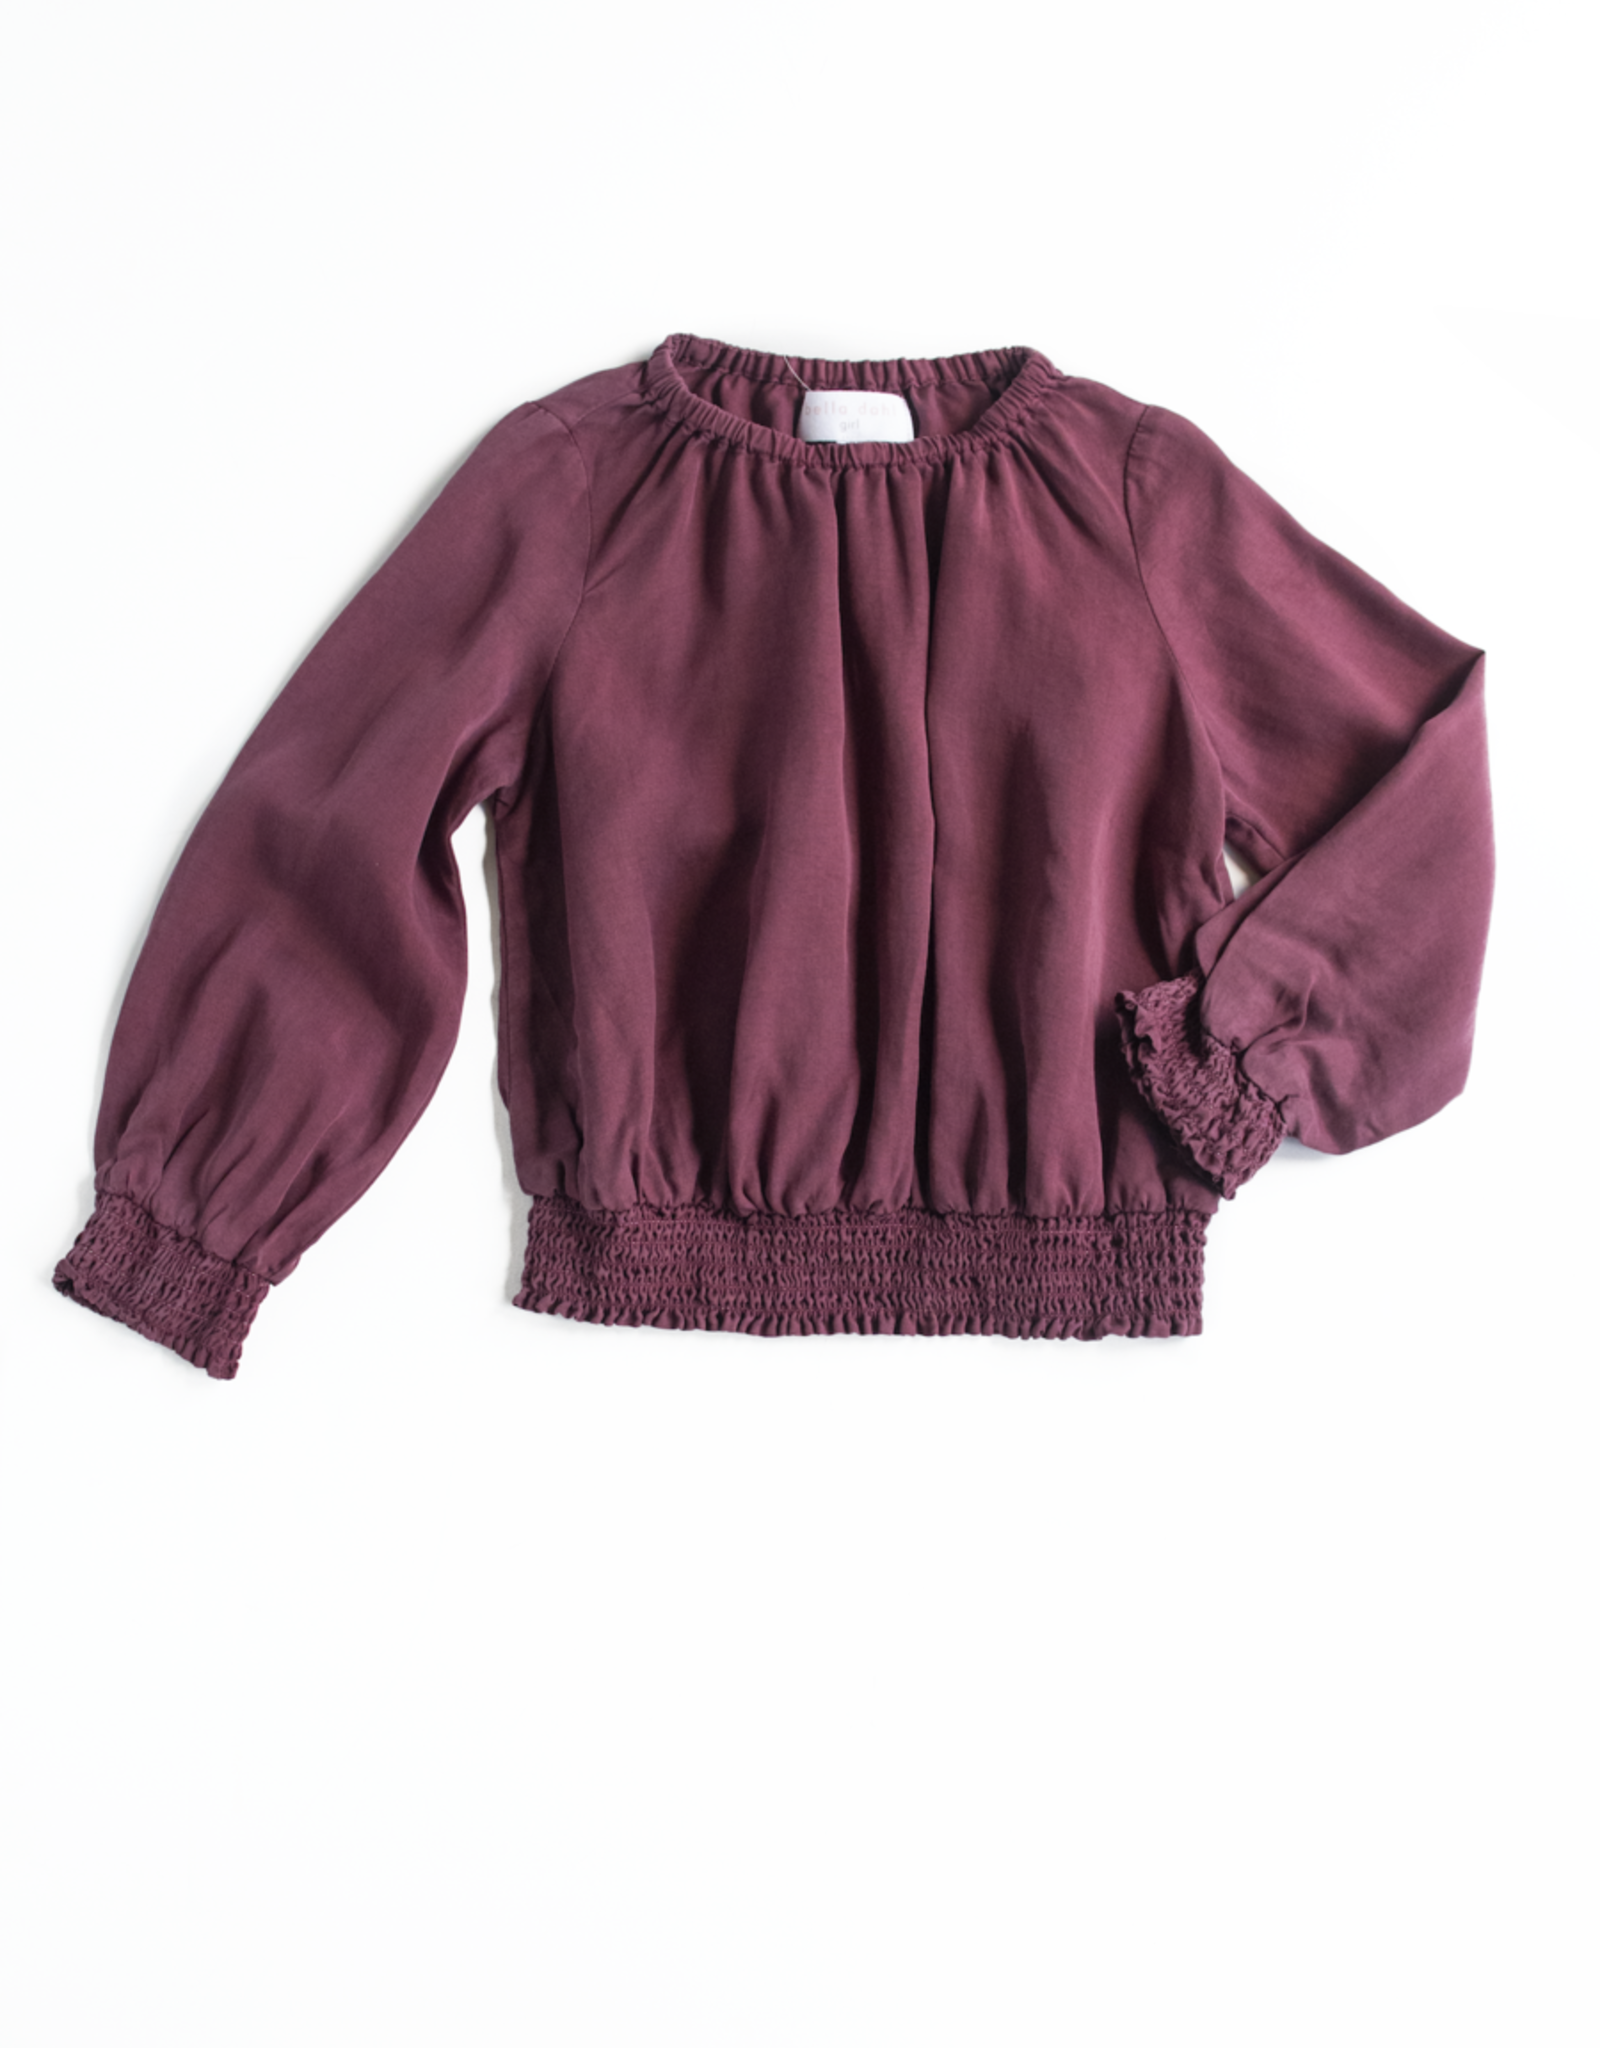 Bella Dahl Girl Smocked Bubble Top Berry Red